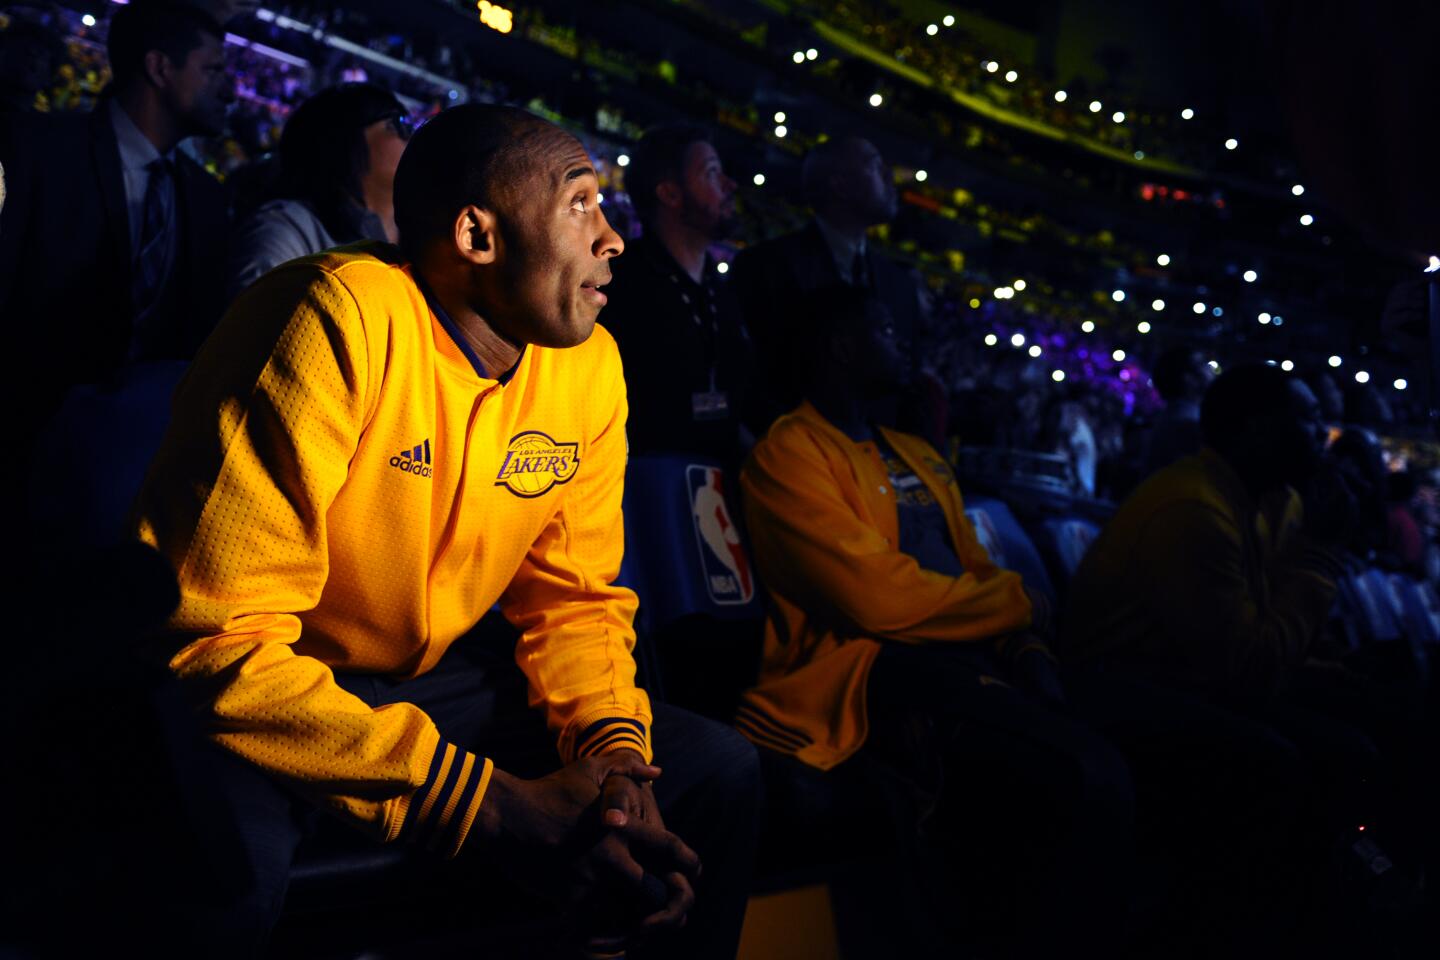 Oscars to pay tribute to Kobe Bryant -- but it's complicated